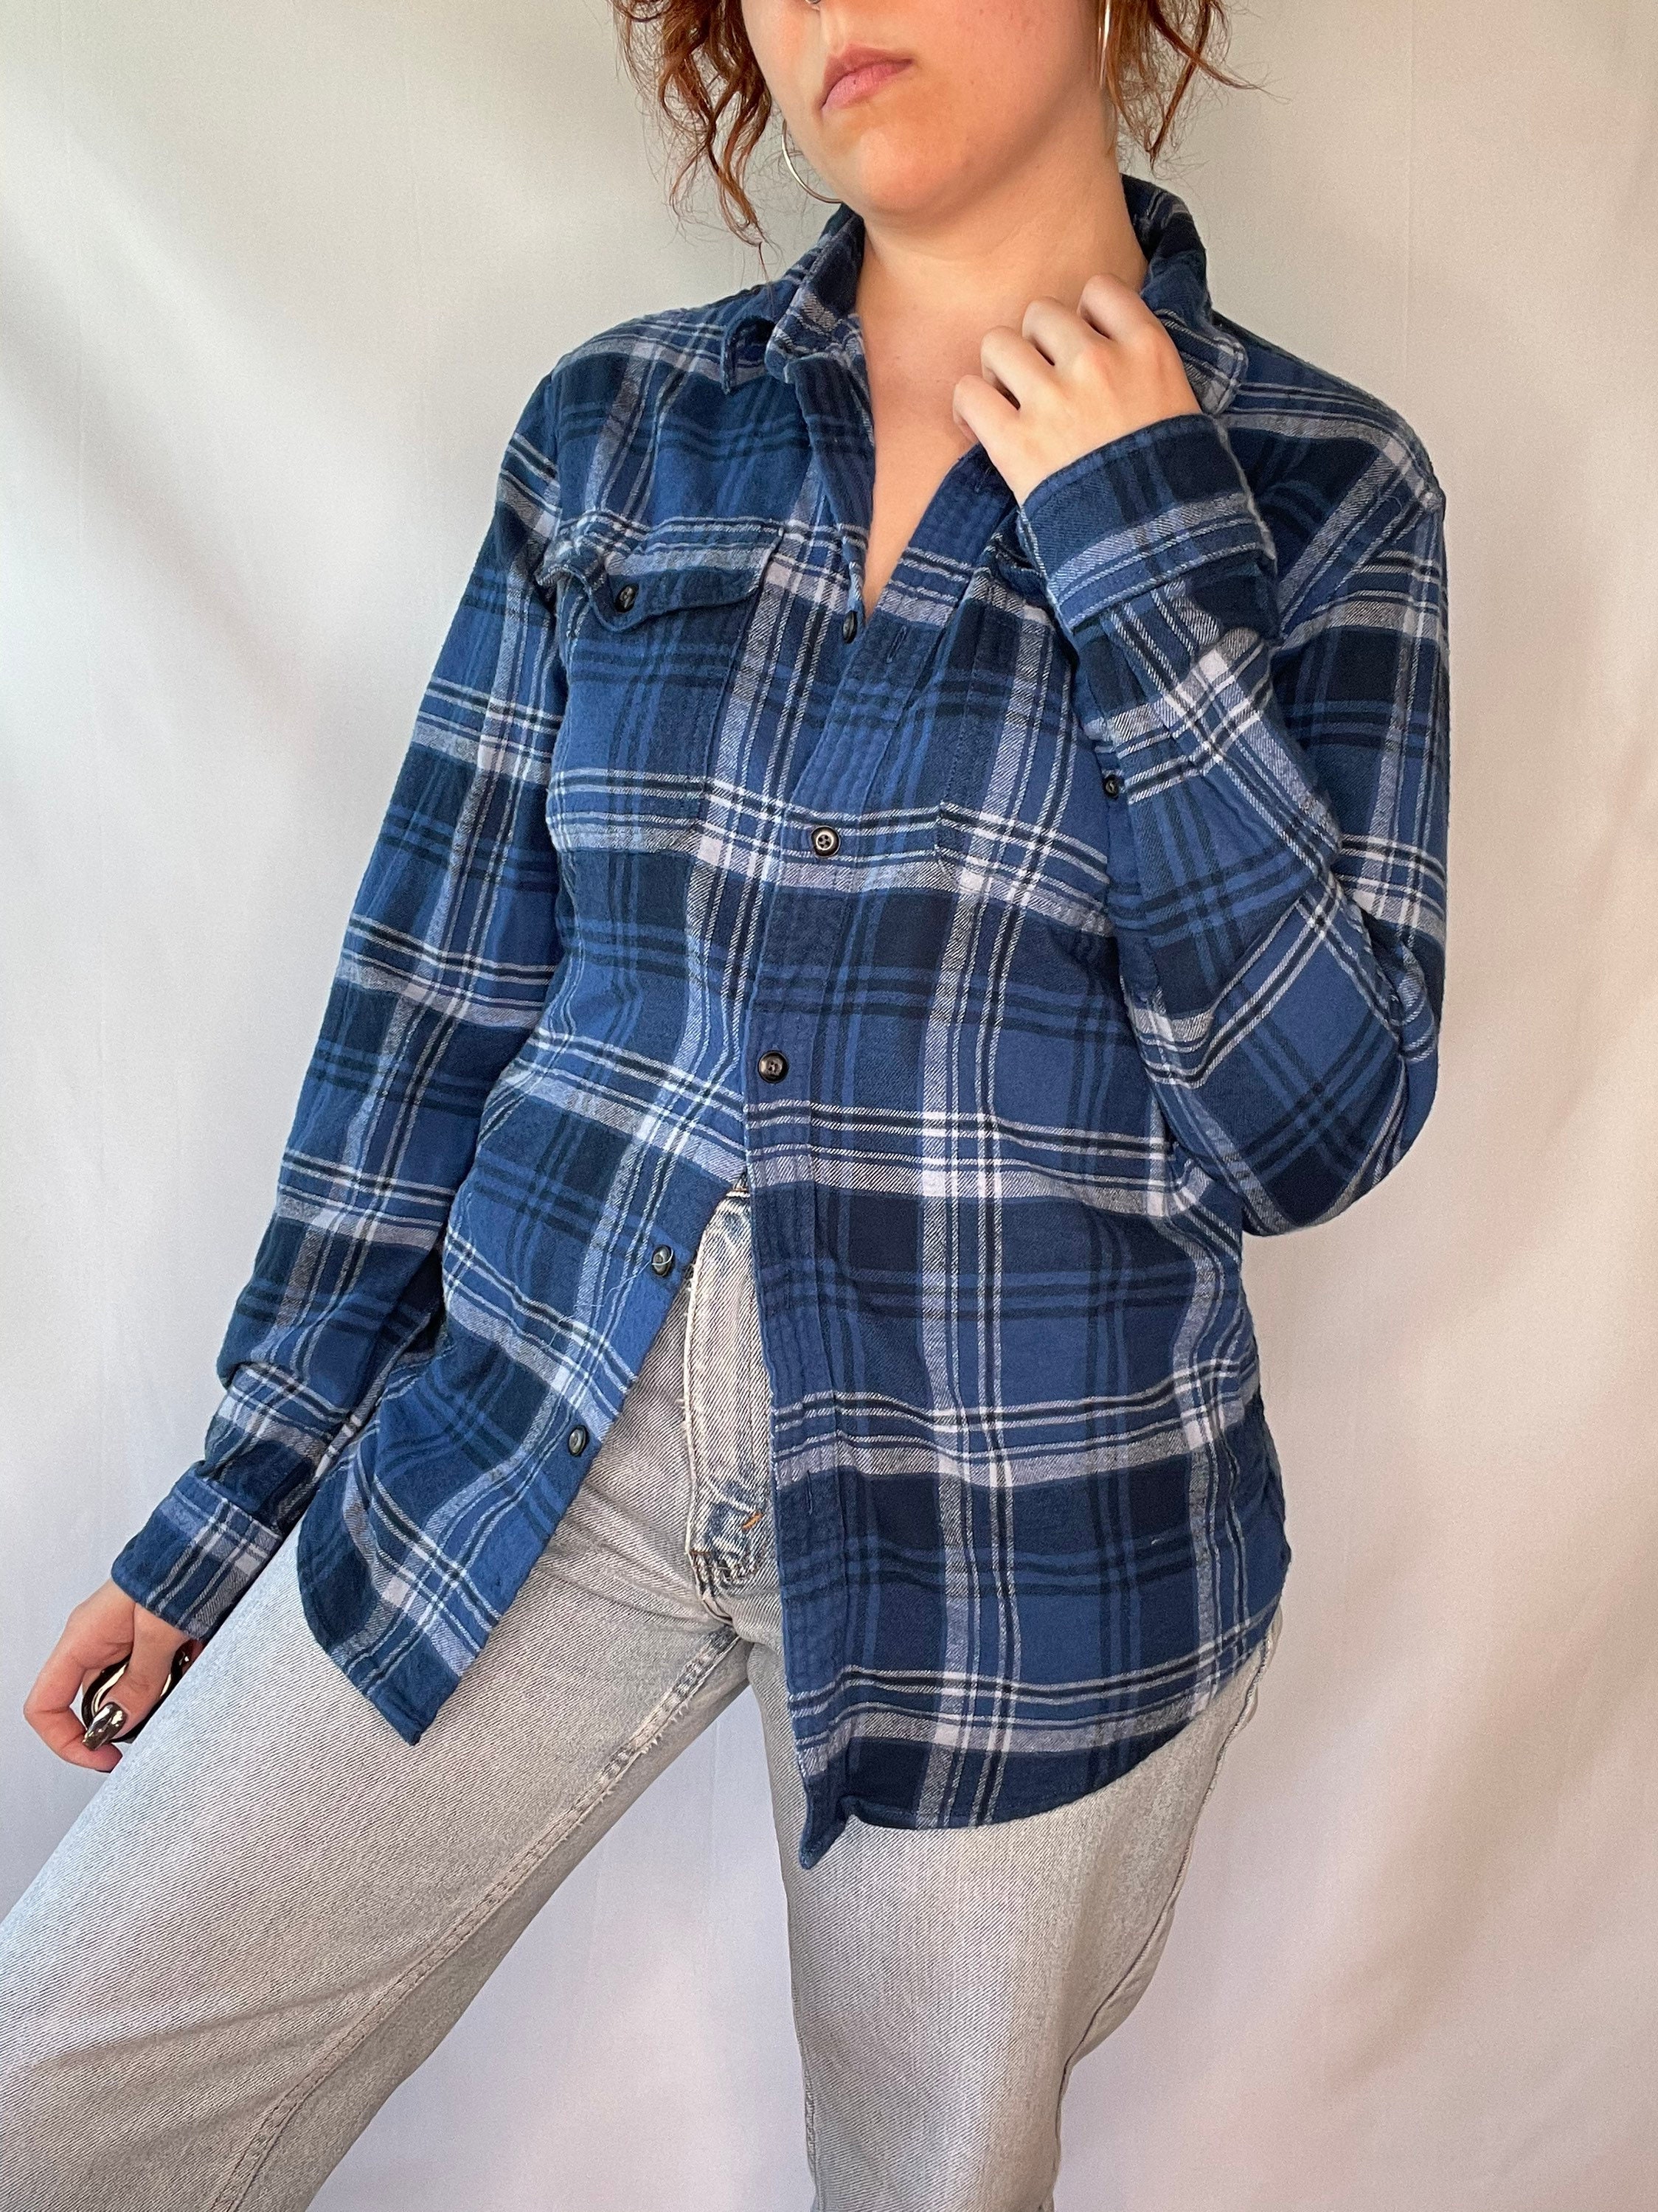 Vintage Oversize Navy Blue White Flannel Shirt for Men and | Etsy